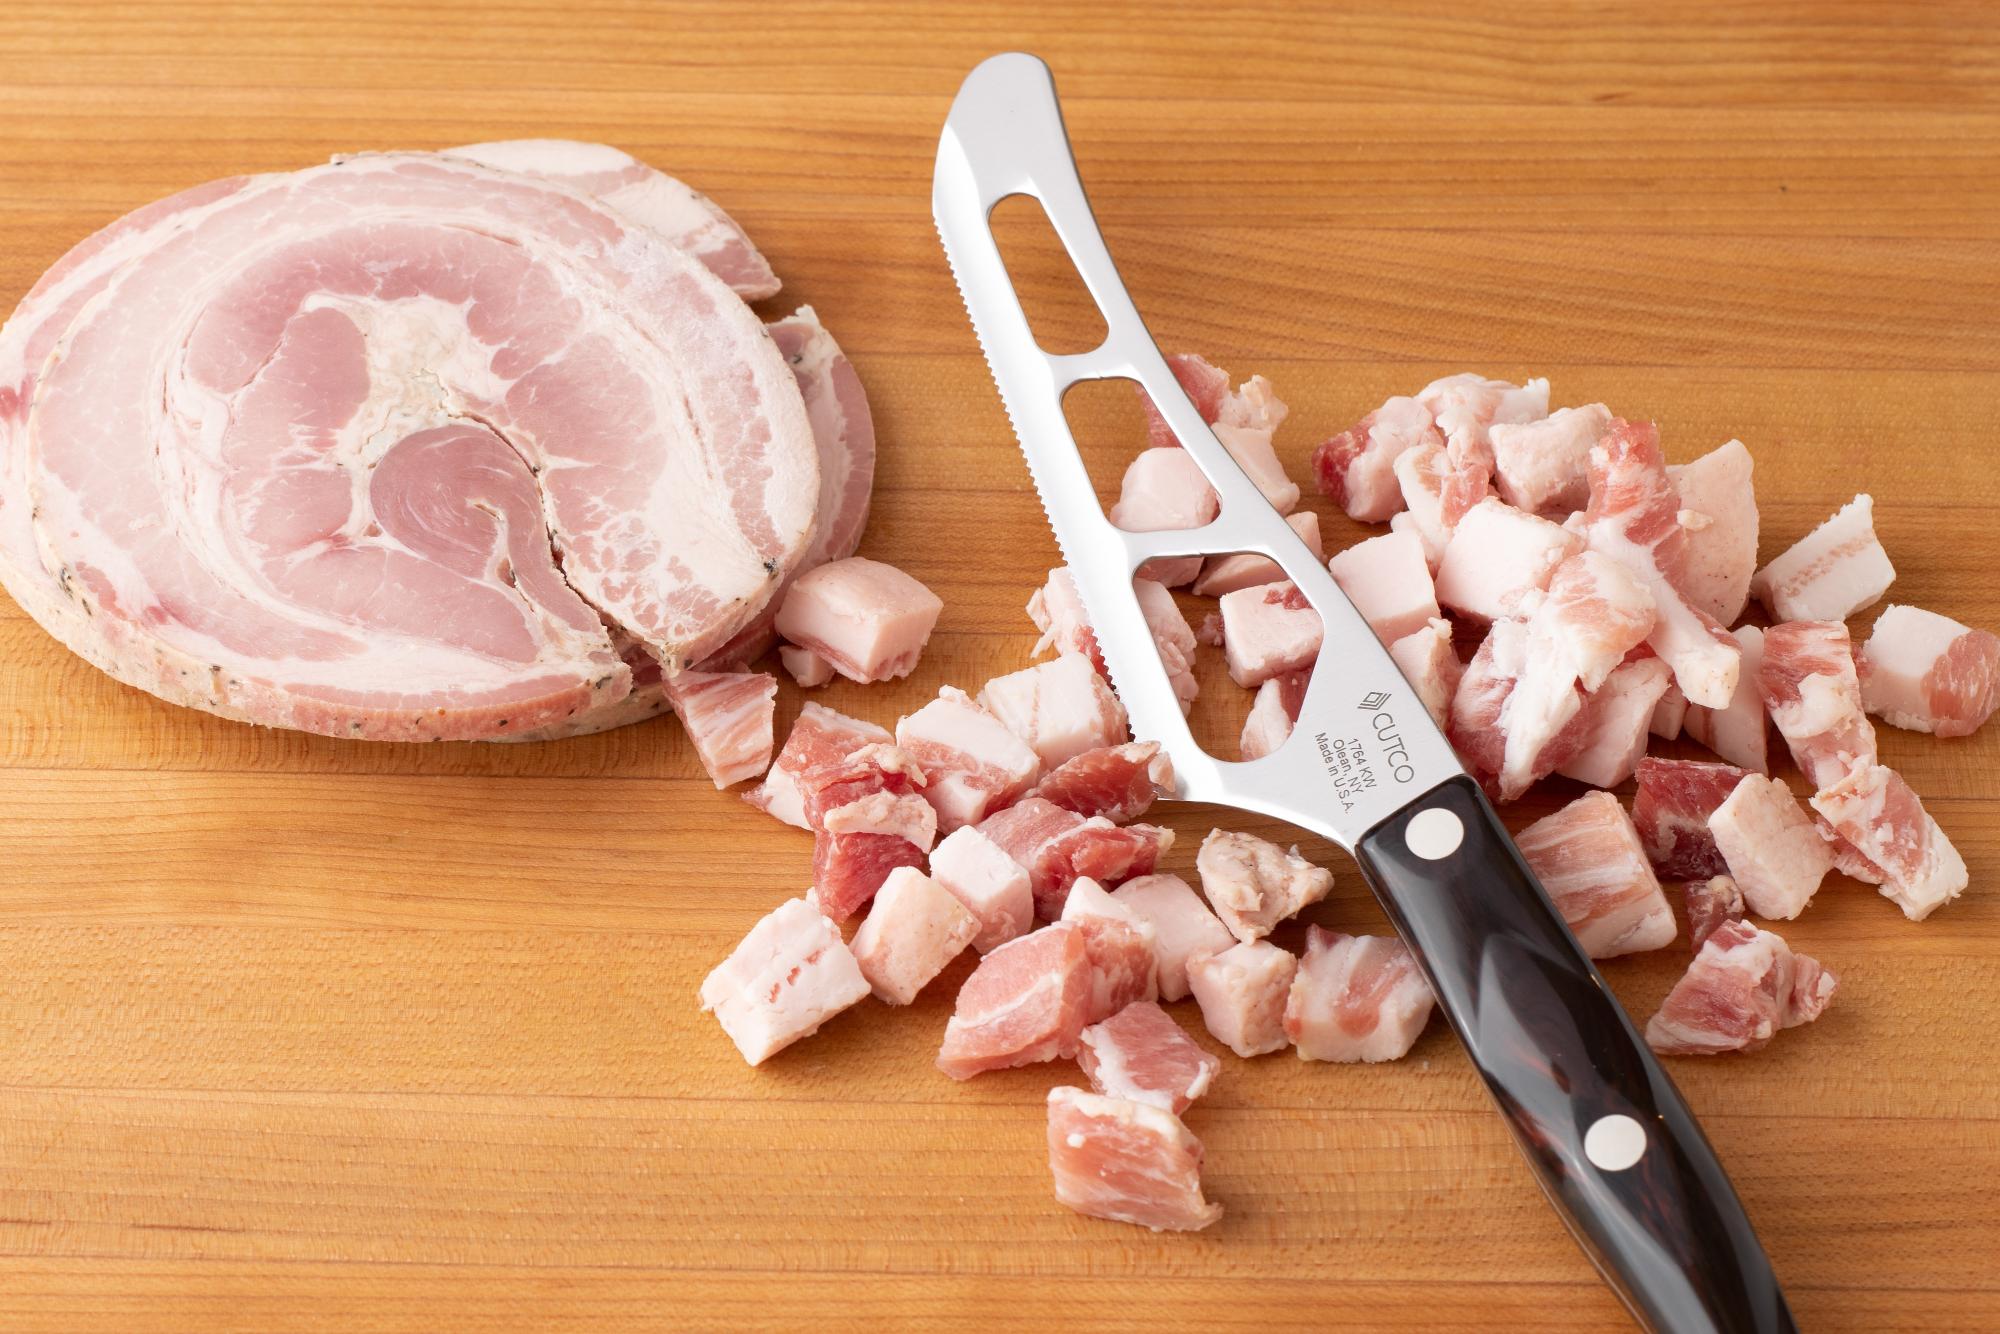 Dice the pancetta with a Traditional Cheese knife.